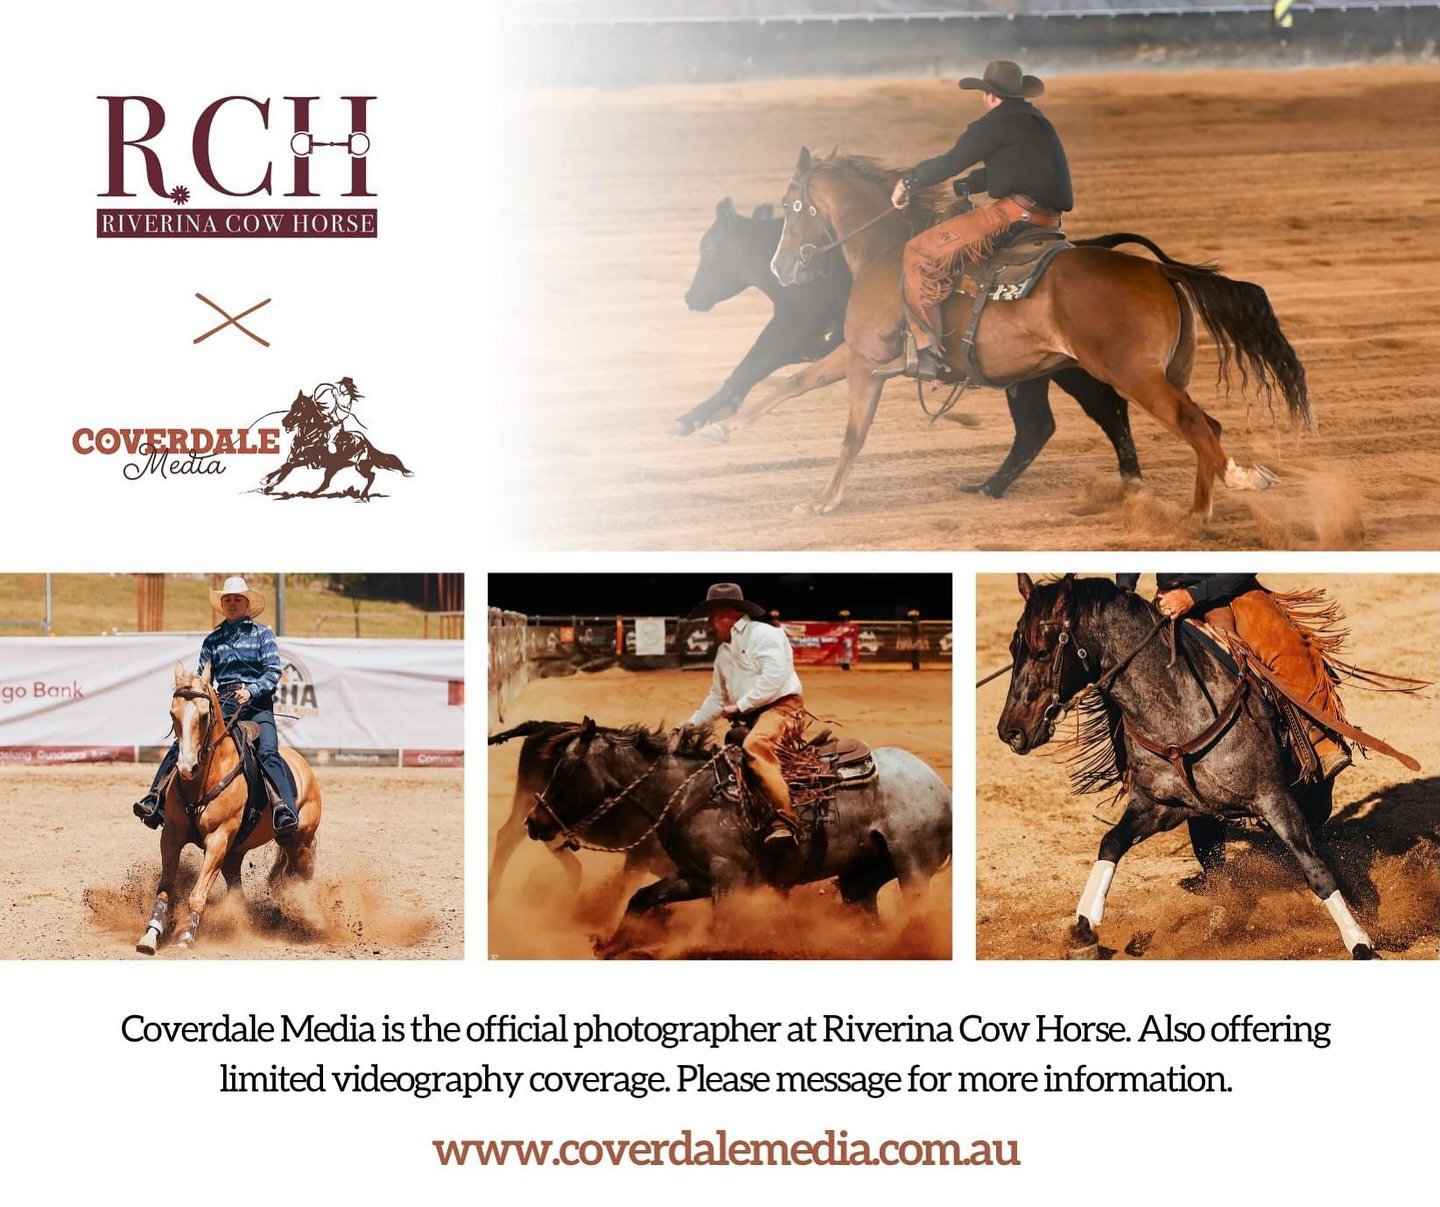 Coverdale Media is the official media for Riverina Cow Horse in May.
We will be photographing all the classes and I am offering limited videography coverage. There will be some classes we cannot offer video for as I am also riding, however, no one wi